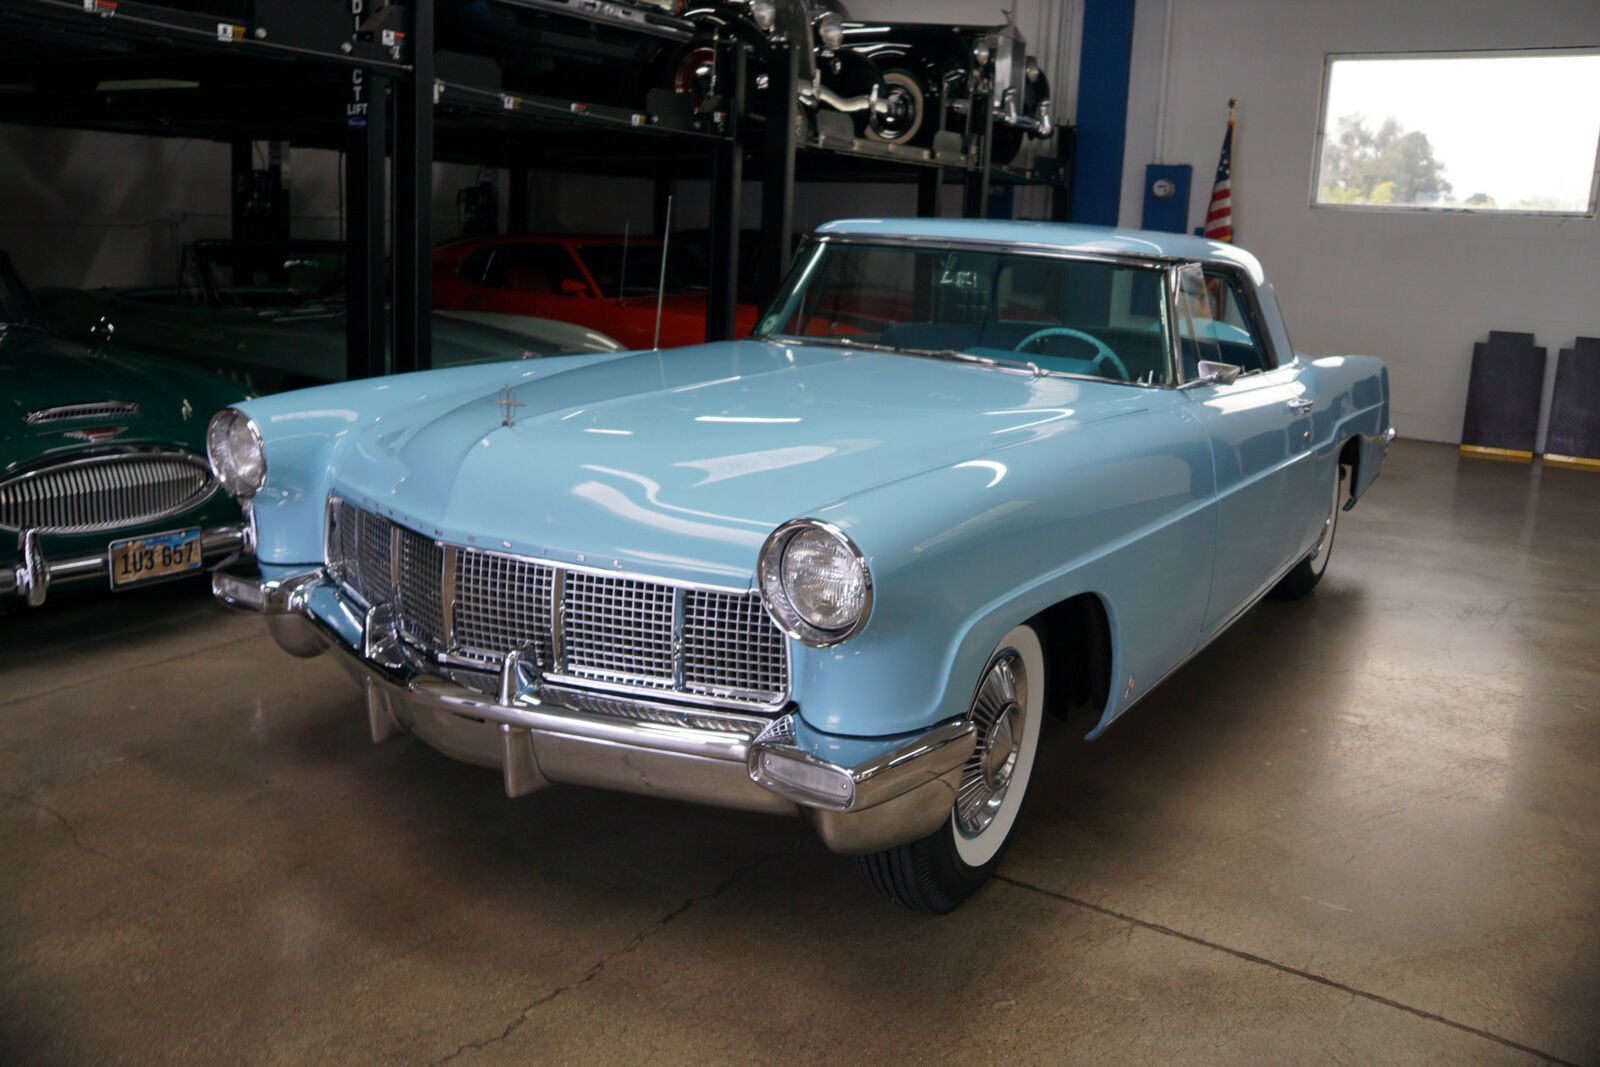 1957 Lincoln Continental Mark Ii With Factory A/c!  34662 Miles 368/300hp V8 Automatic2 Door Hardtop